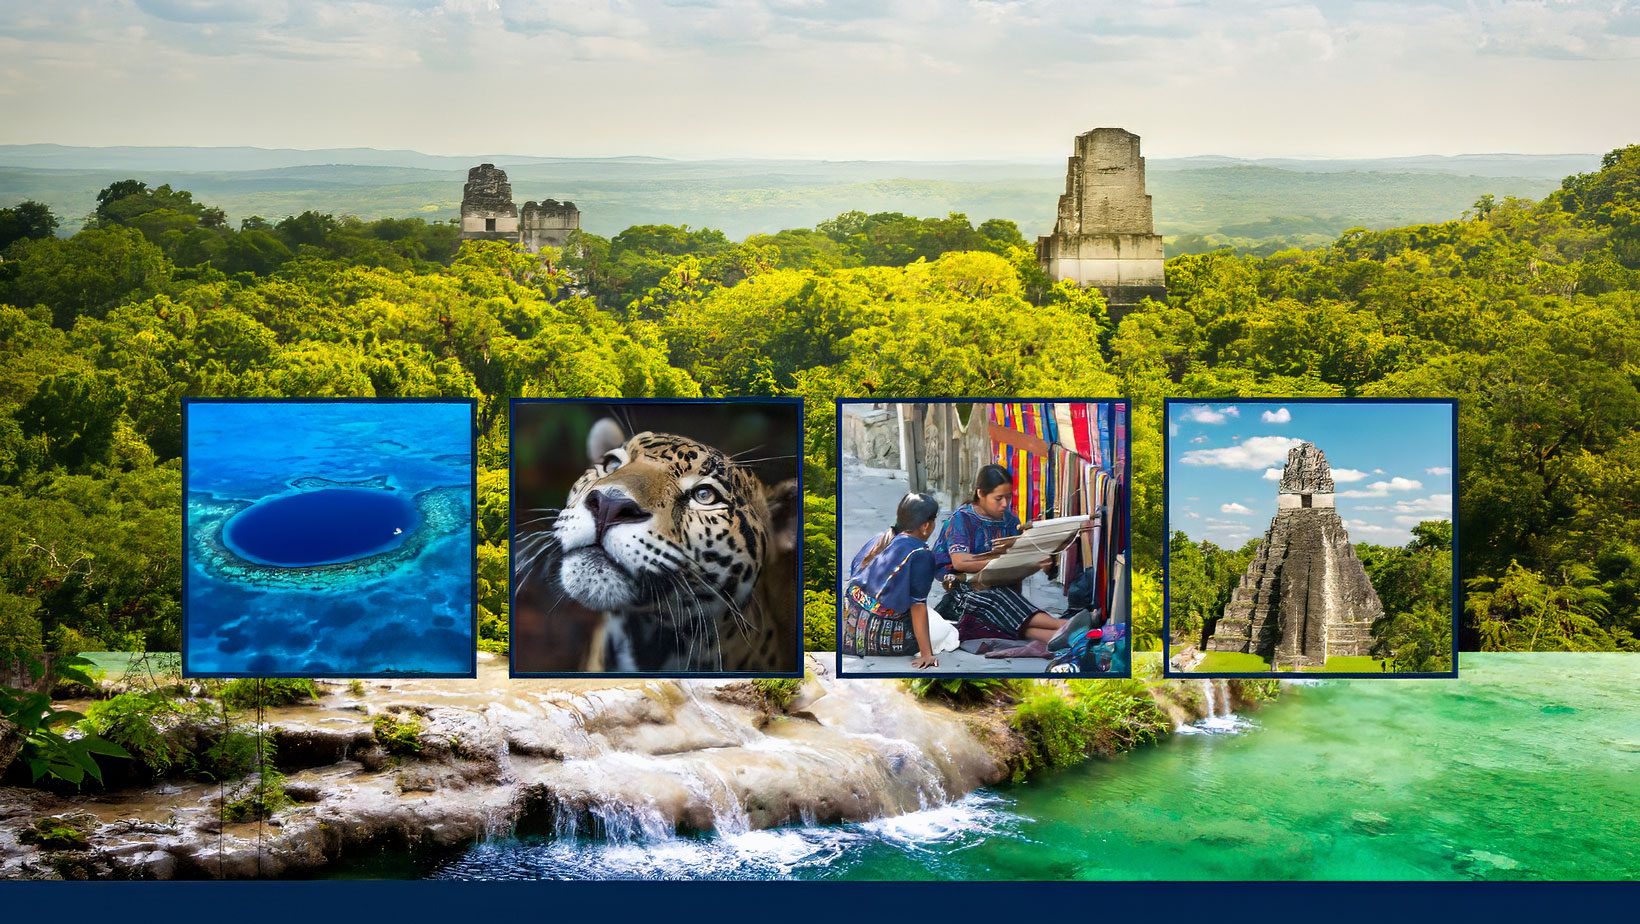 Collage featuring diverse experiences in Guatemala and Belize: tropical fruits in a market, a man standing atop Acatenango Volcano watching Fuego Volcano eruptions, panoramic view of Tikal ruins, and the underwater Blue Hole in Belize